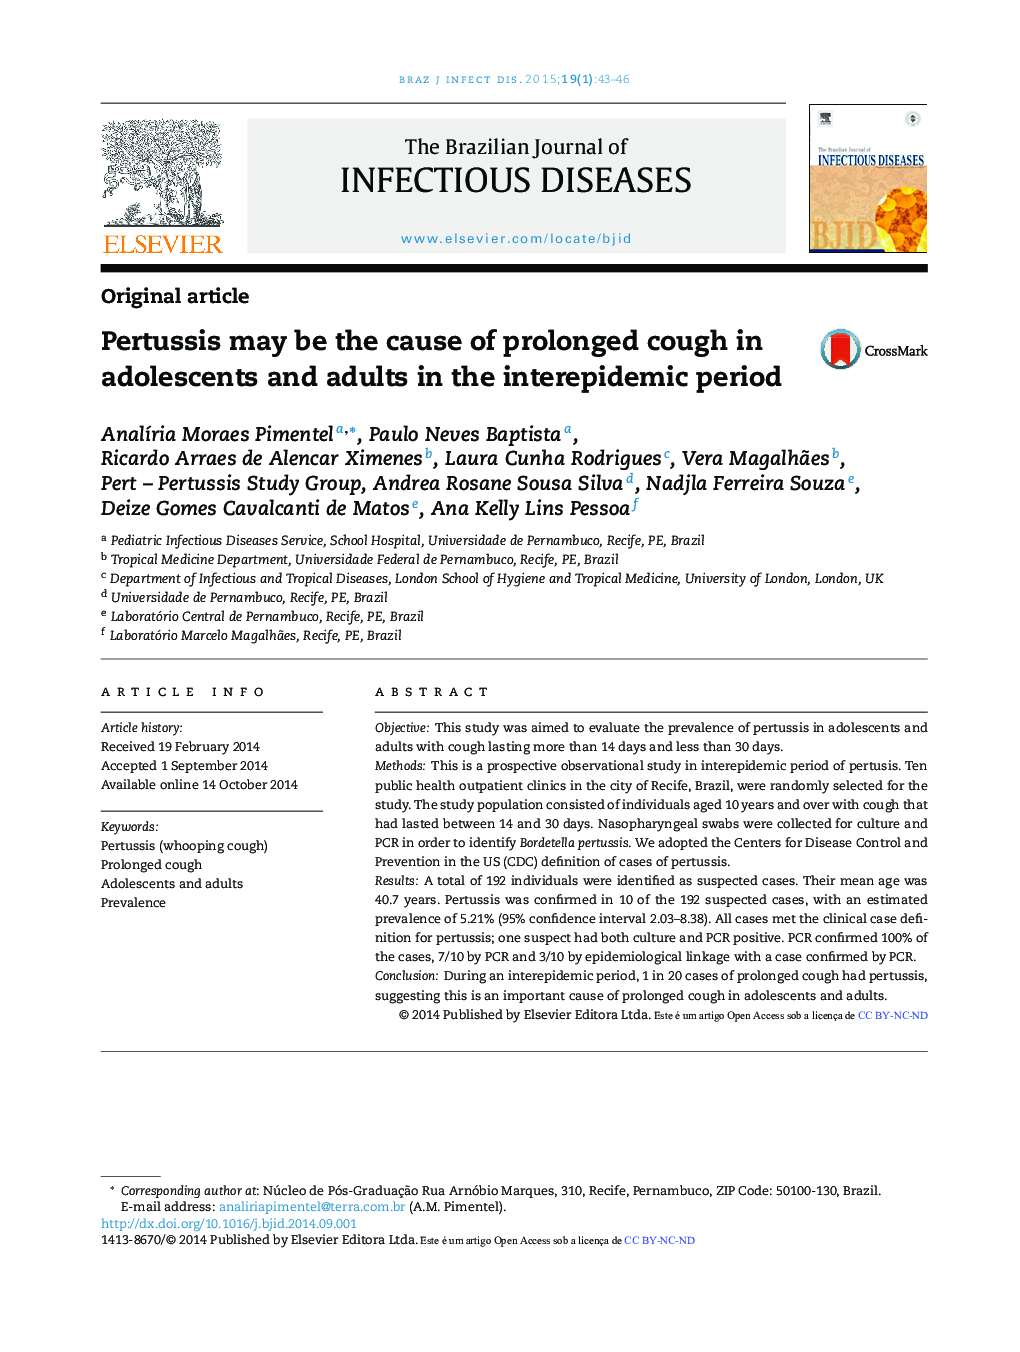 Pertussis may be the cause of prolonged cough in adolescents and adults in the interepidemic period